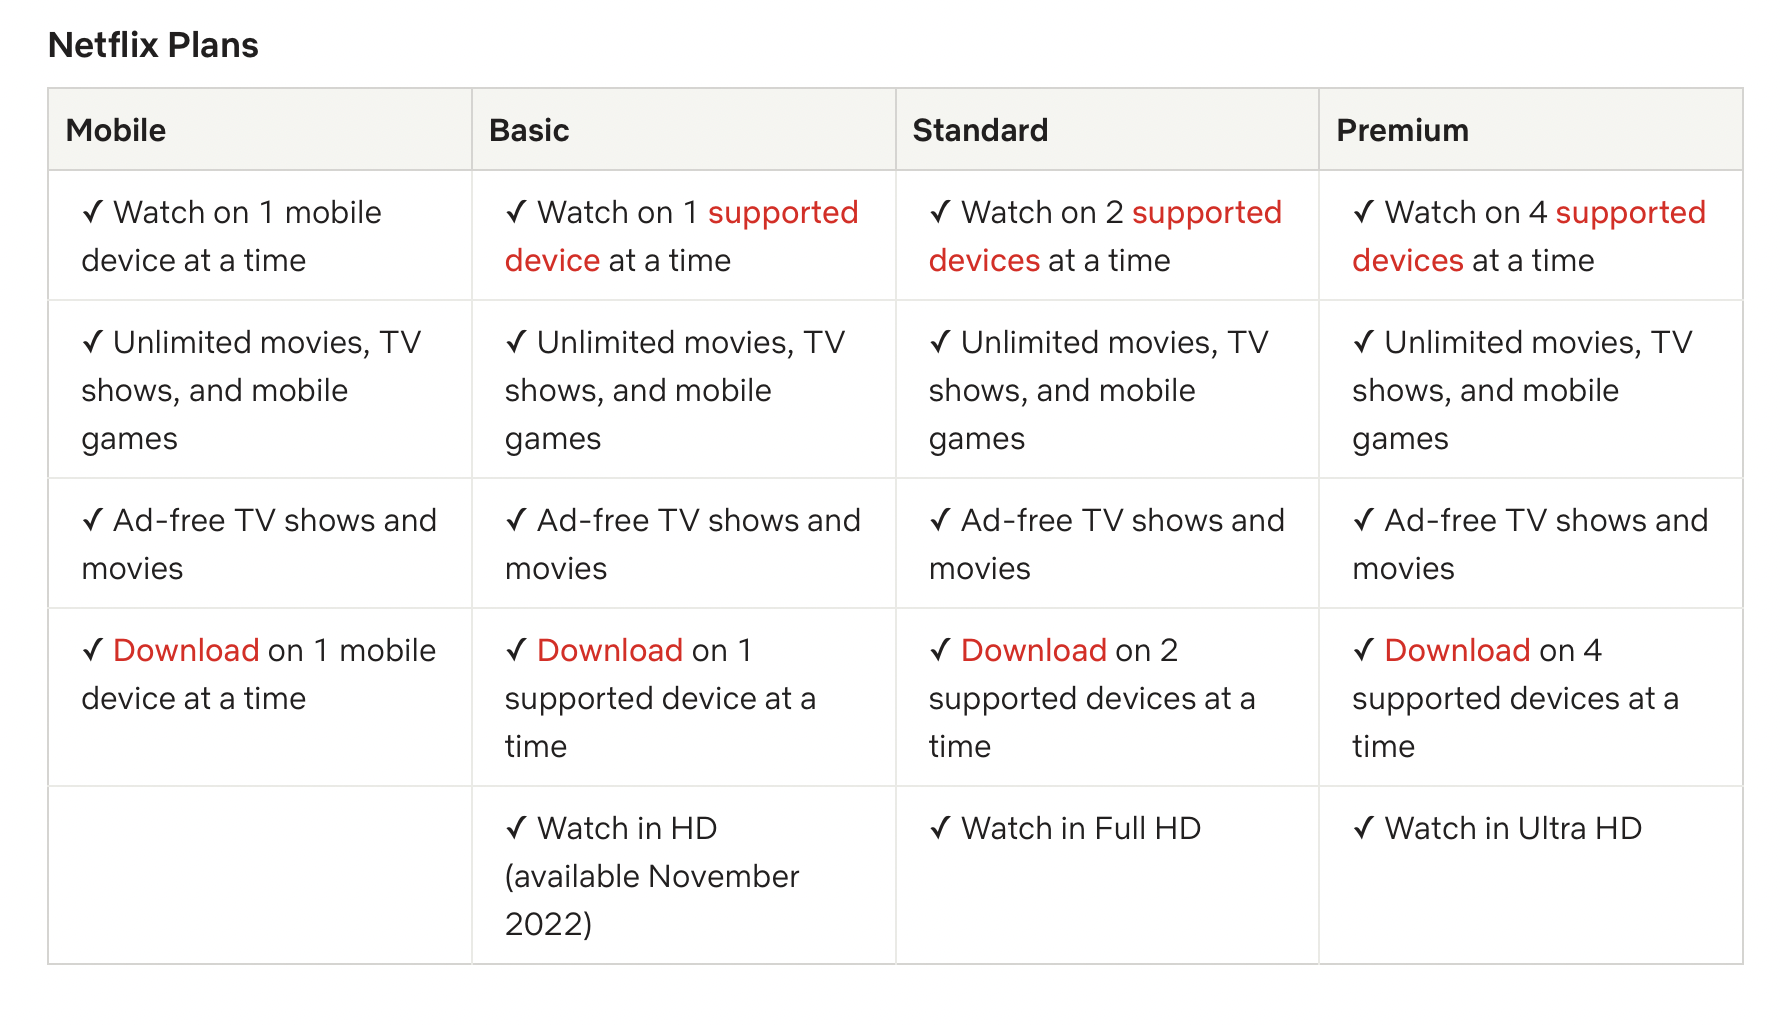 Netflix Fundamental plan subscribers in Malaysia can stream as much as